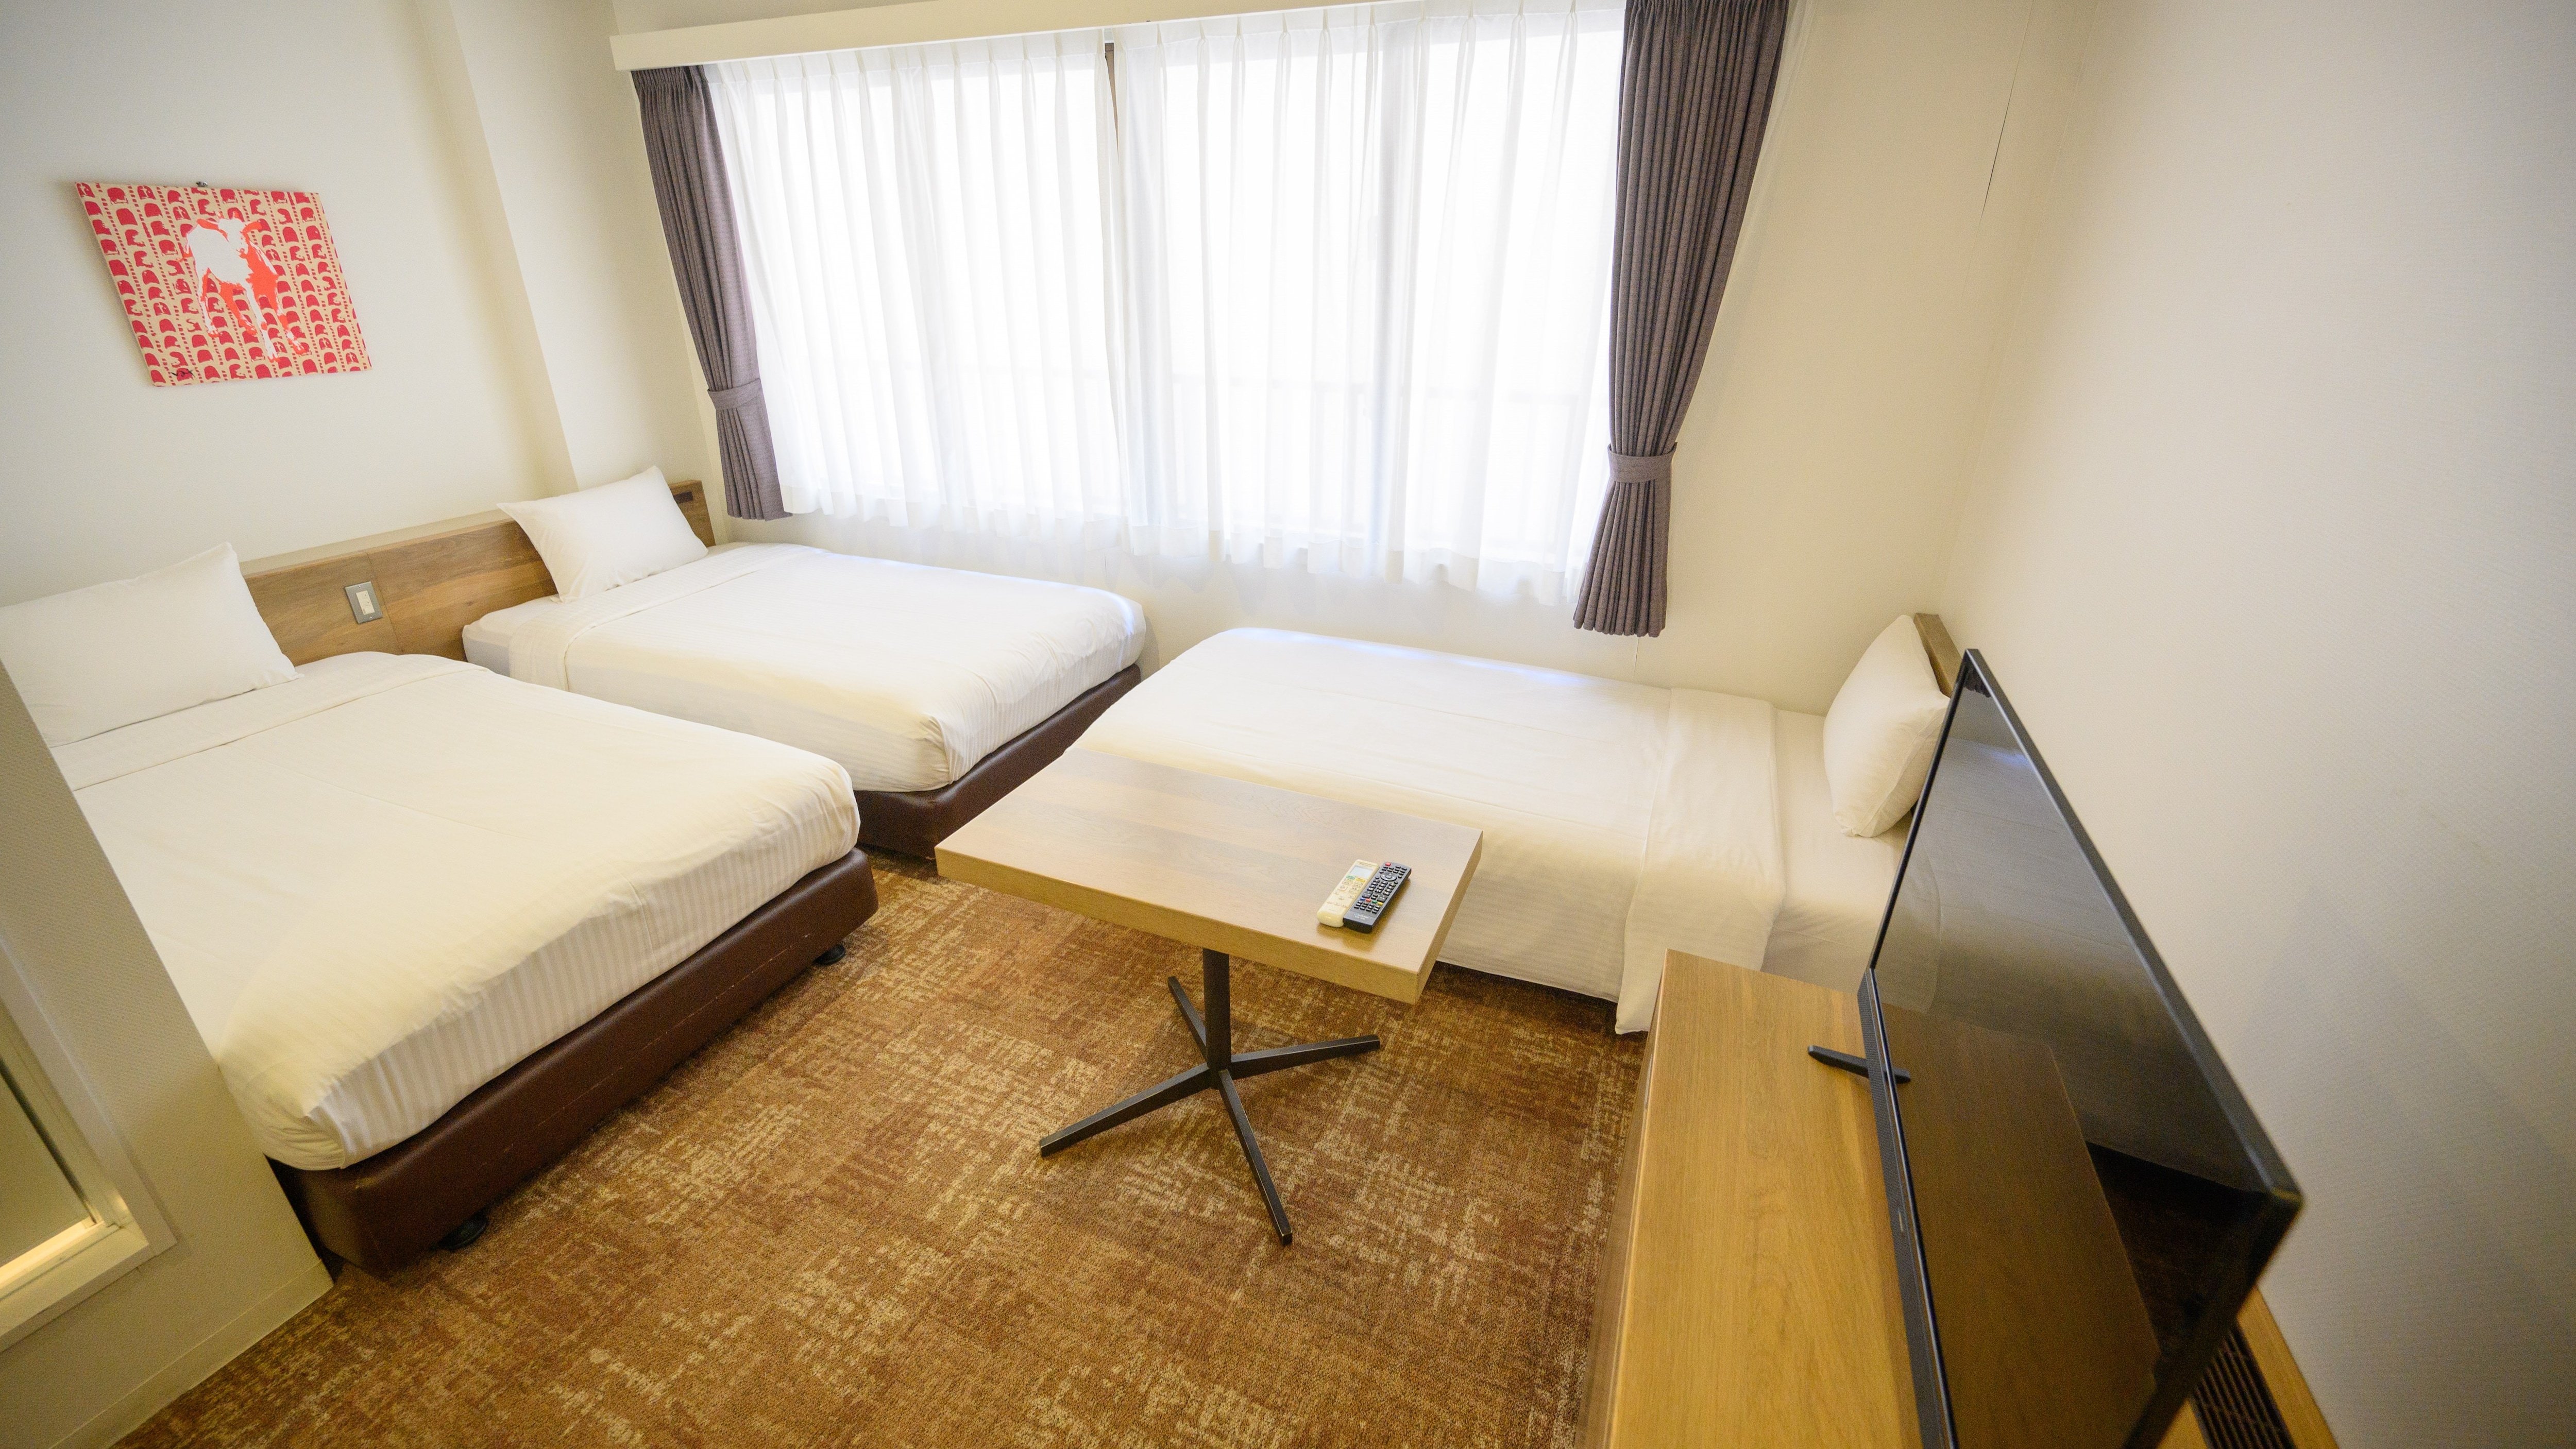 ◆Triple room/extra bed available. Recommended for group trips and family trips. (Example guest room)